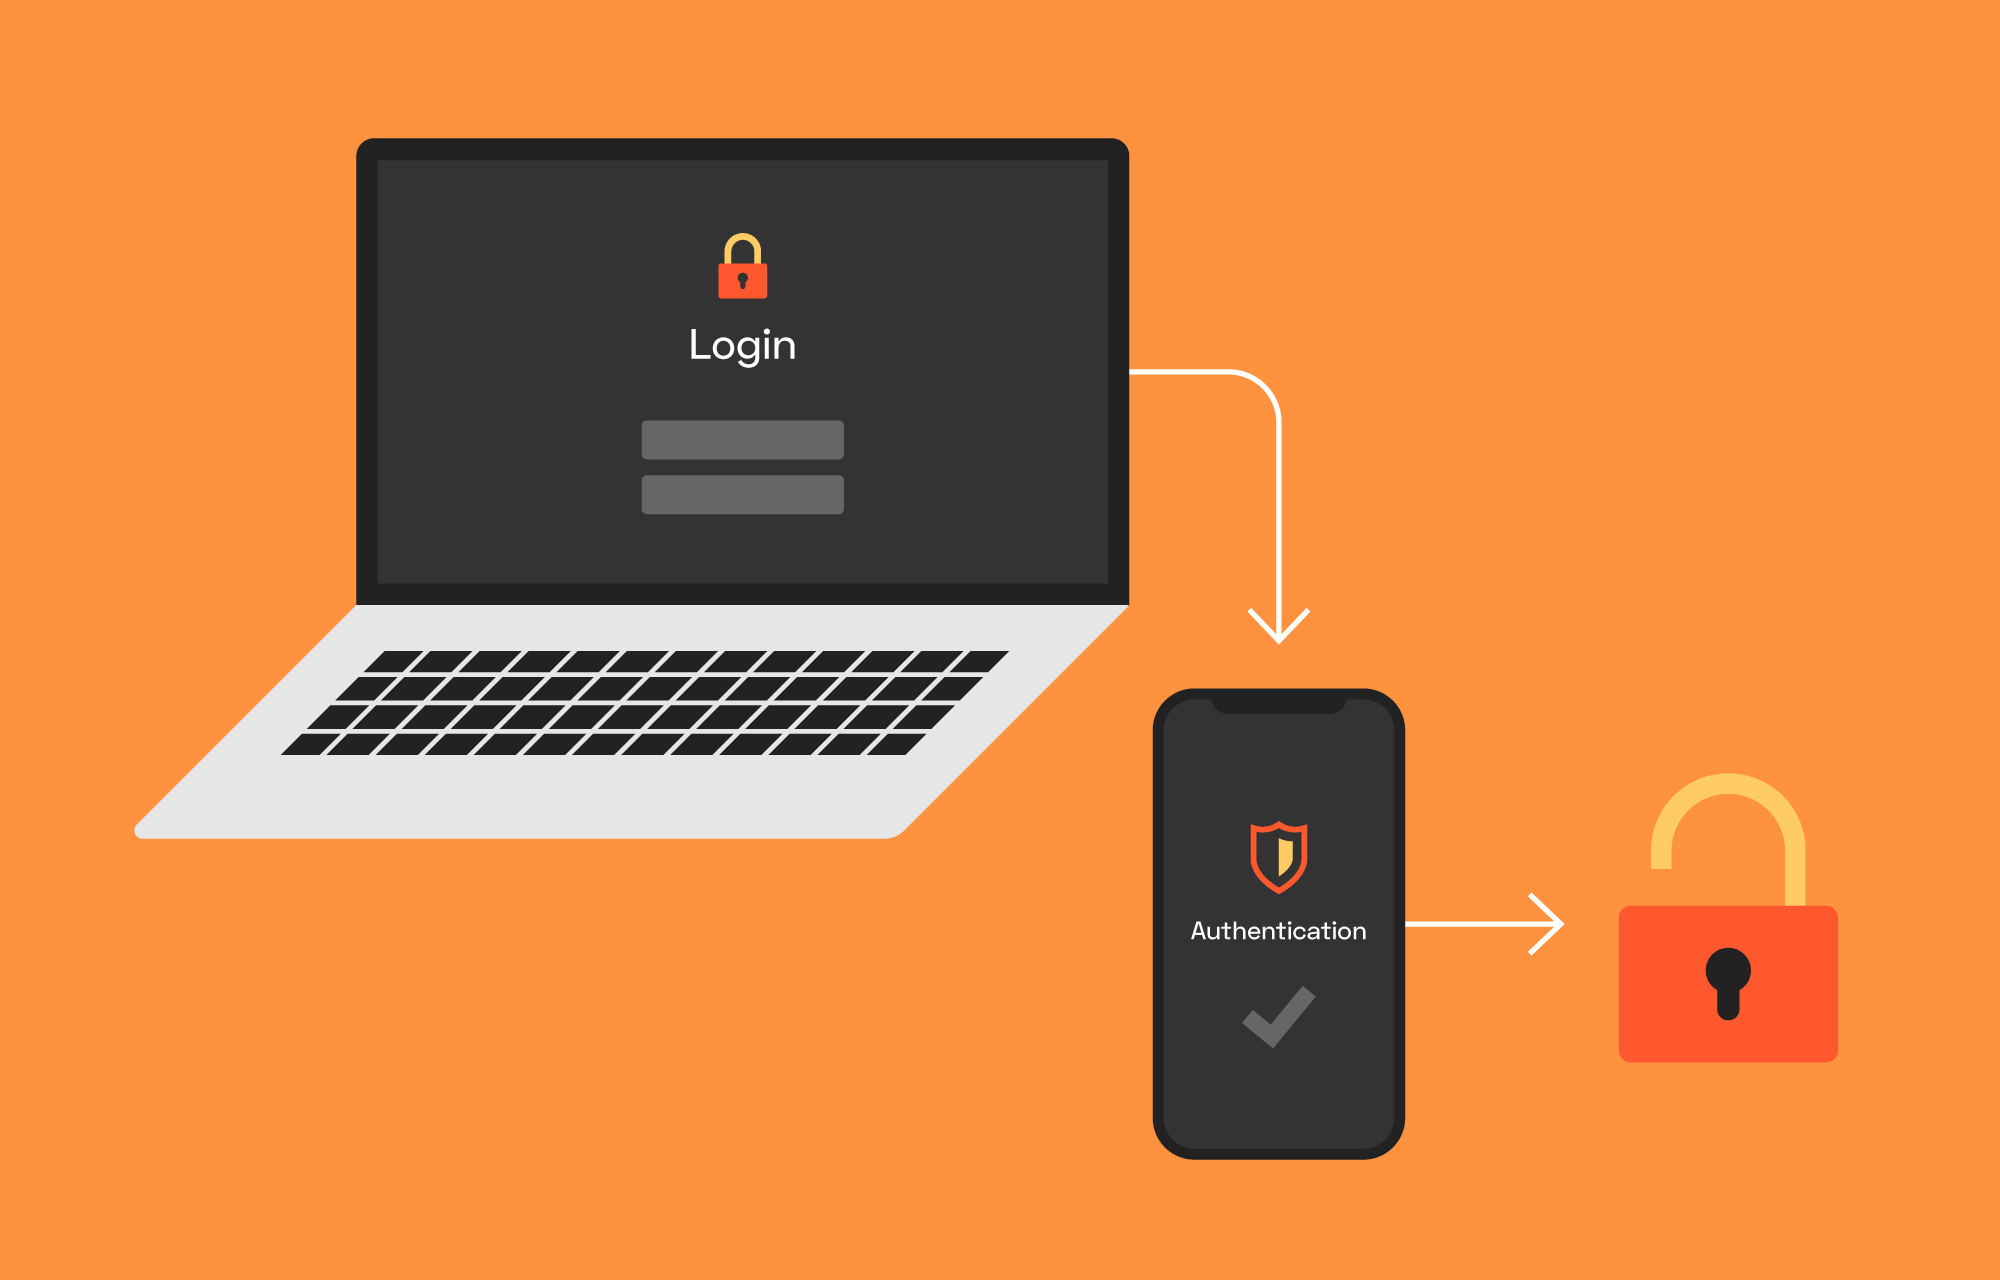 Make your workplace more secure with 2-factor authentication